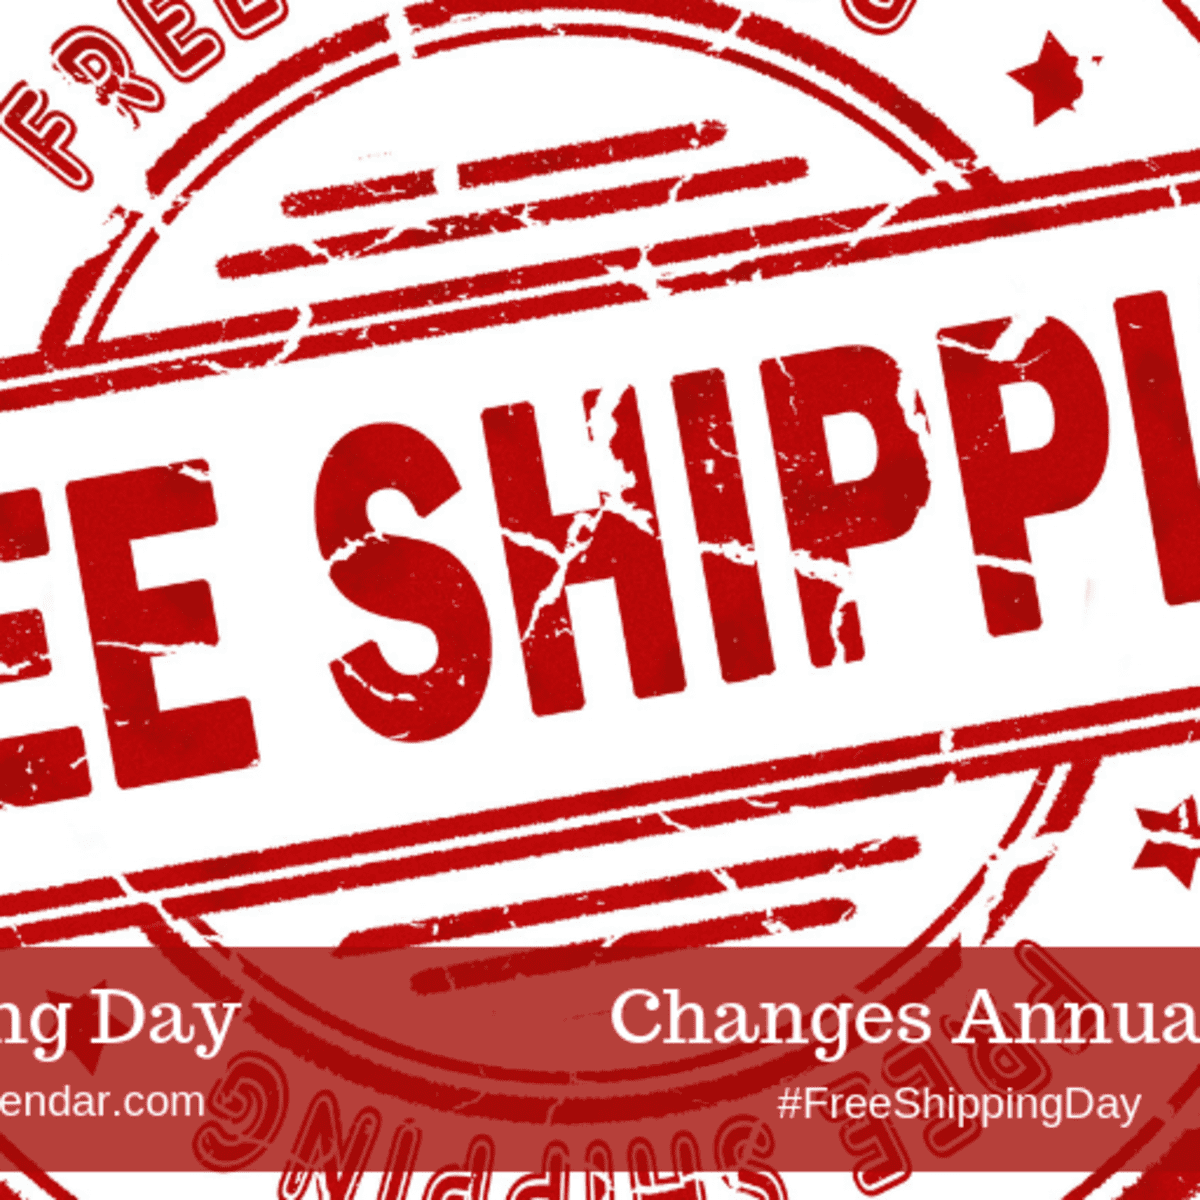 Shipping Information: Free, Same or Next Day, & More